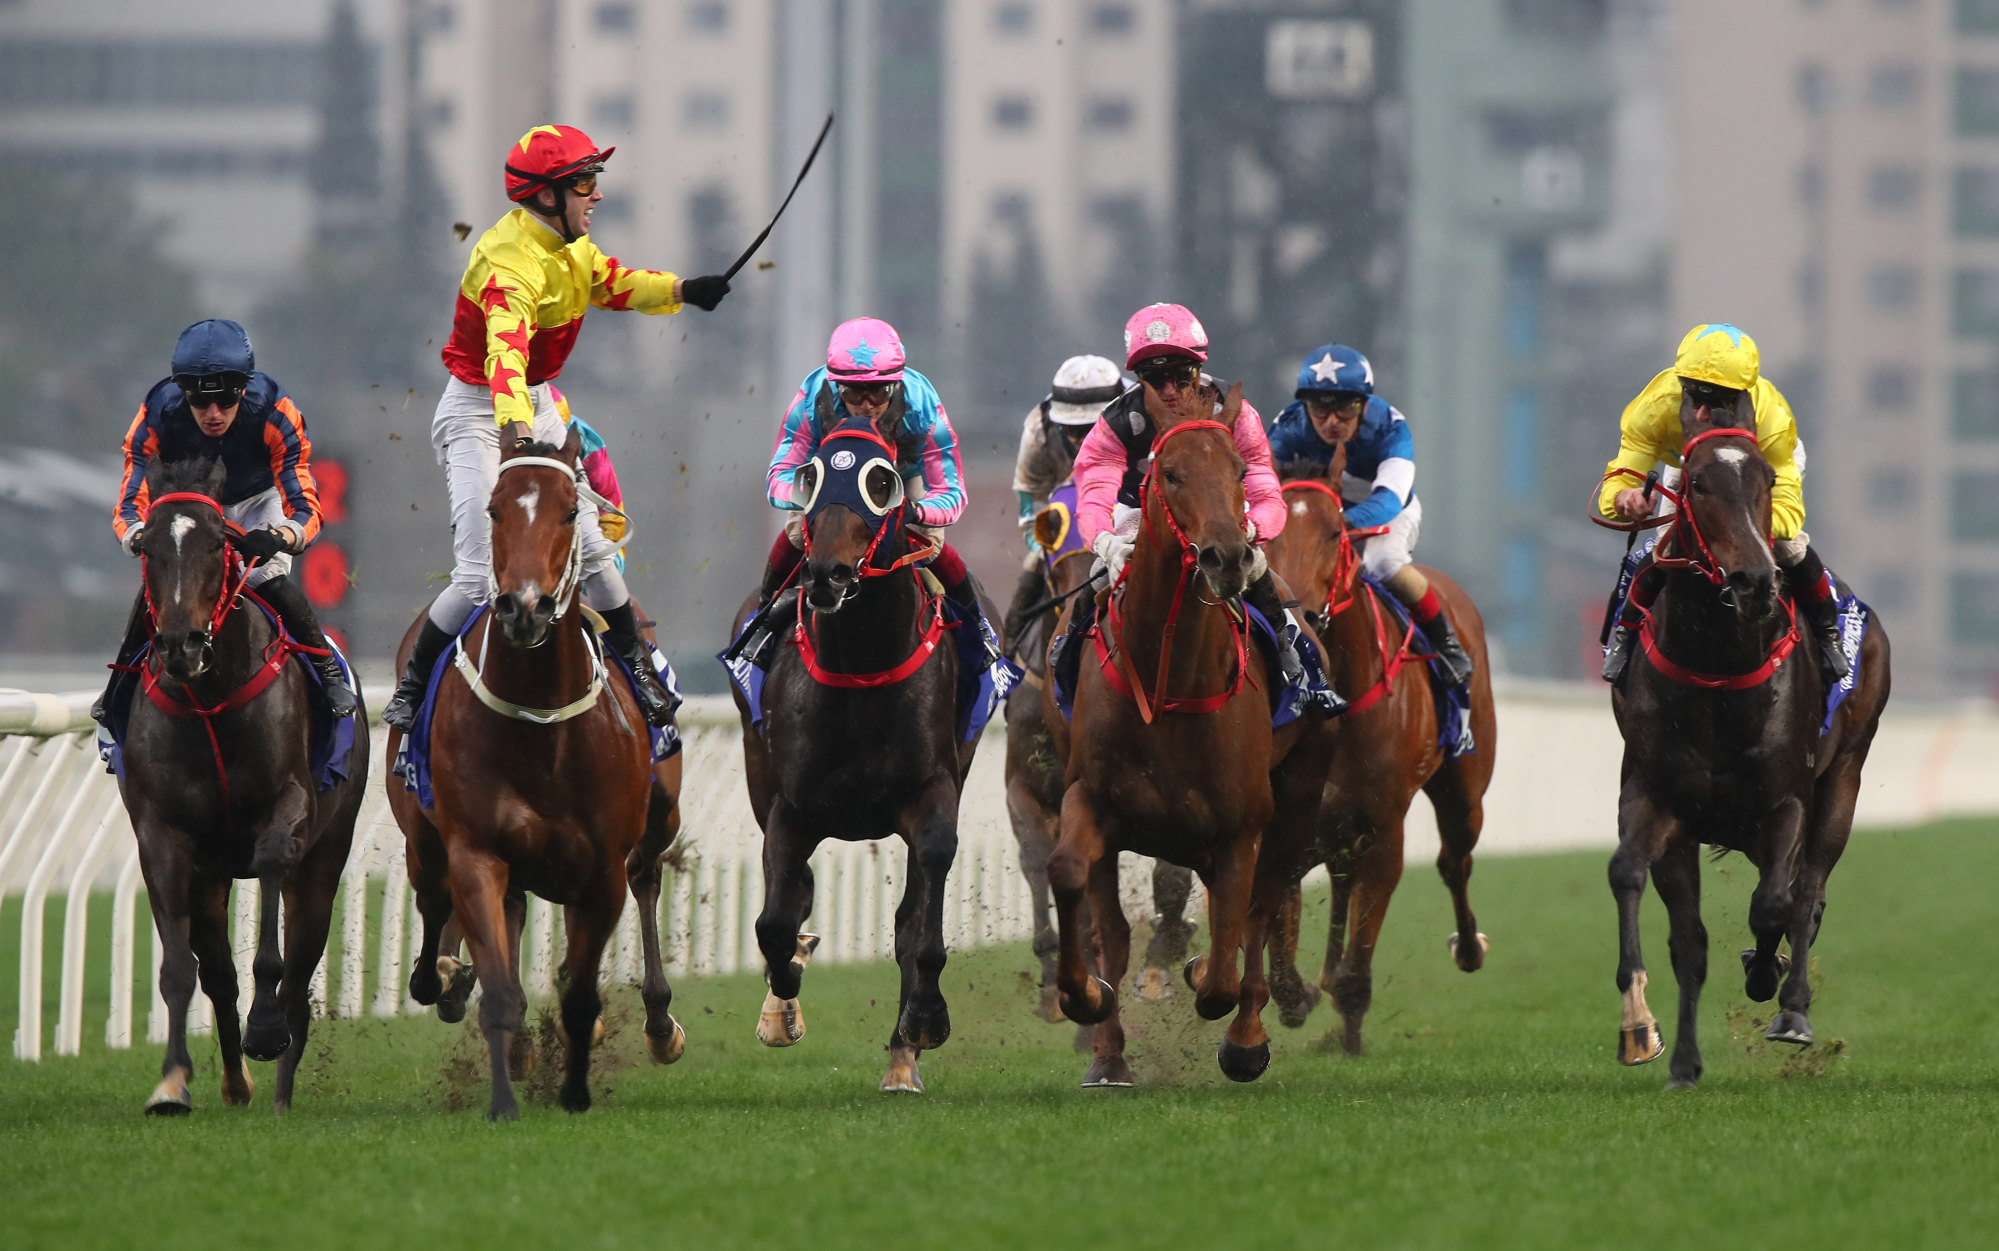 Brenton Avdulla celebrates his maiden Group One win in Hong Kong aboard Tony Cruz’s stable star.